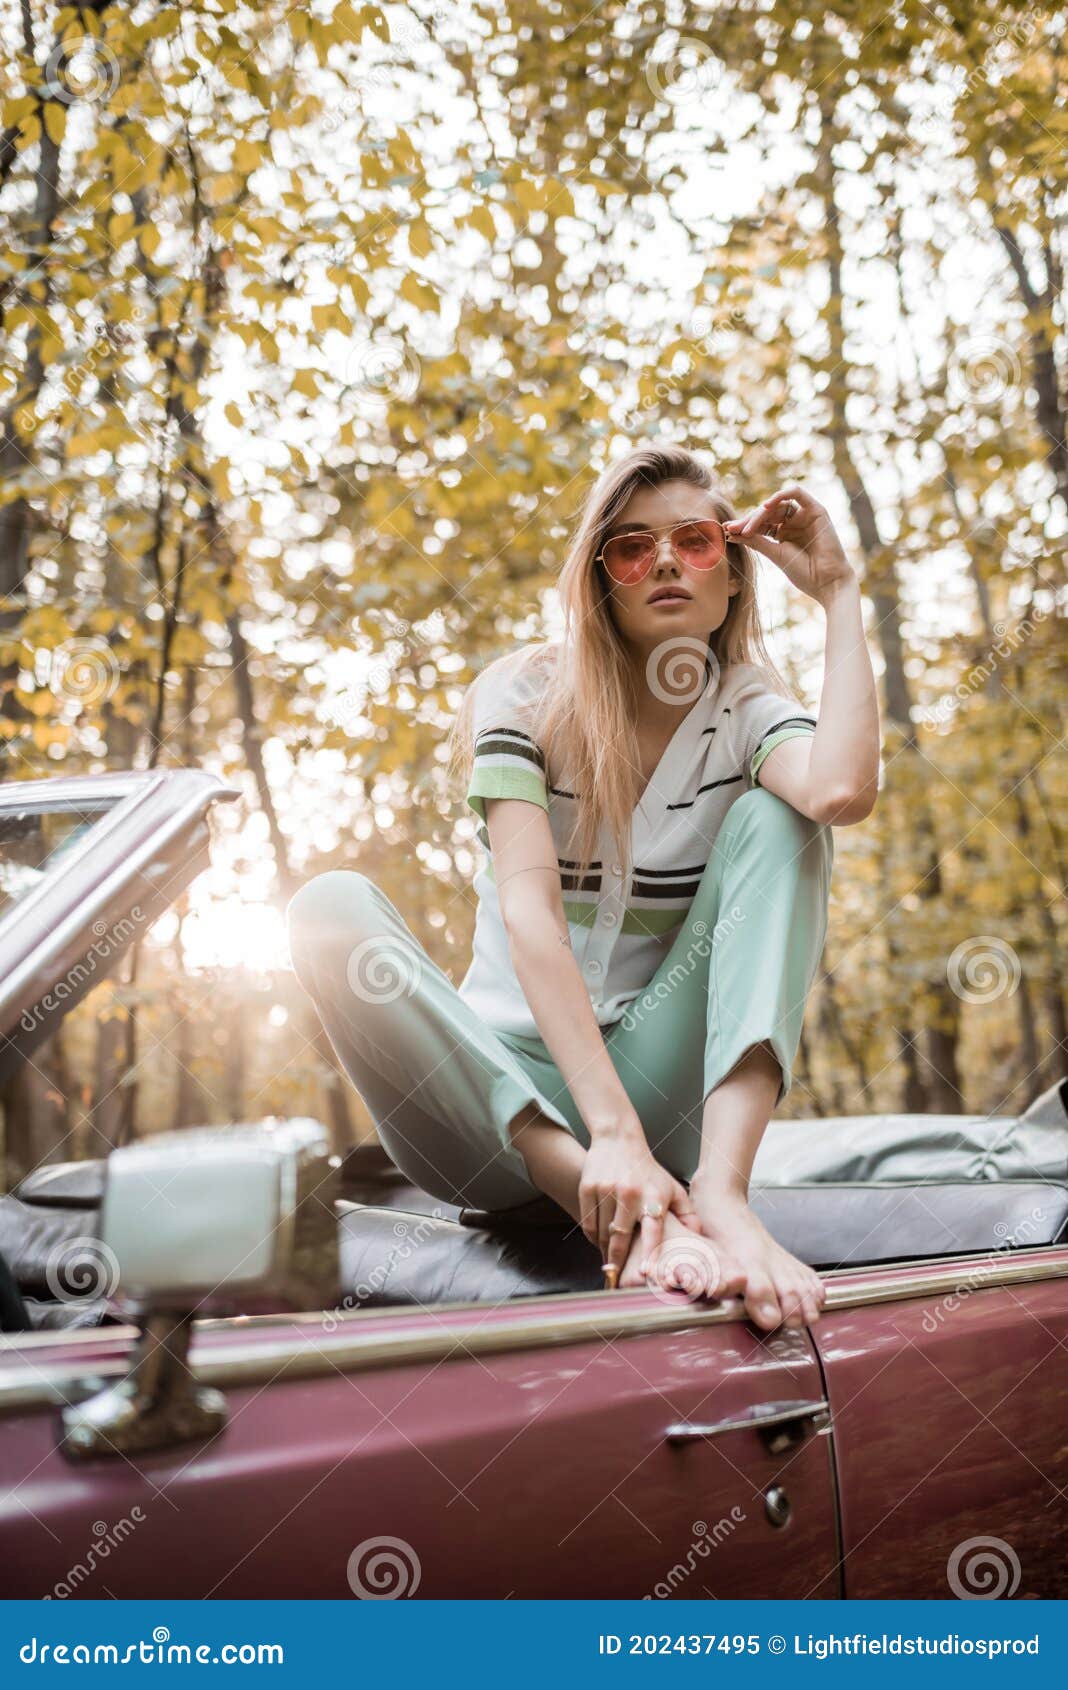 https://thumbs.dreamstime.com/z/barefoot-woman-touching-sunglasses-posing-cabriolet-forest-blurred-foreground-stylish-202437495.jpg